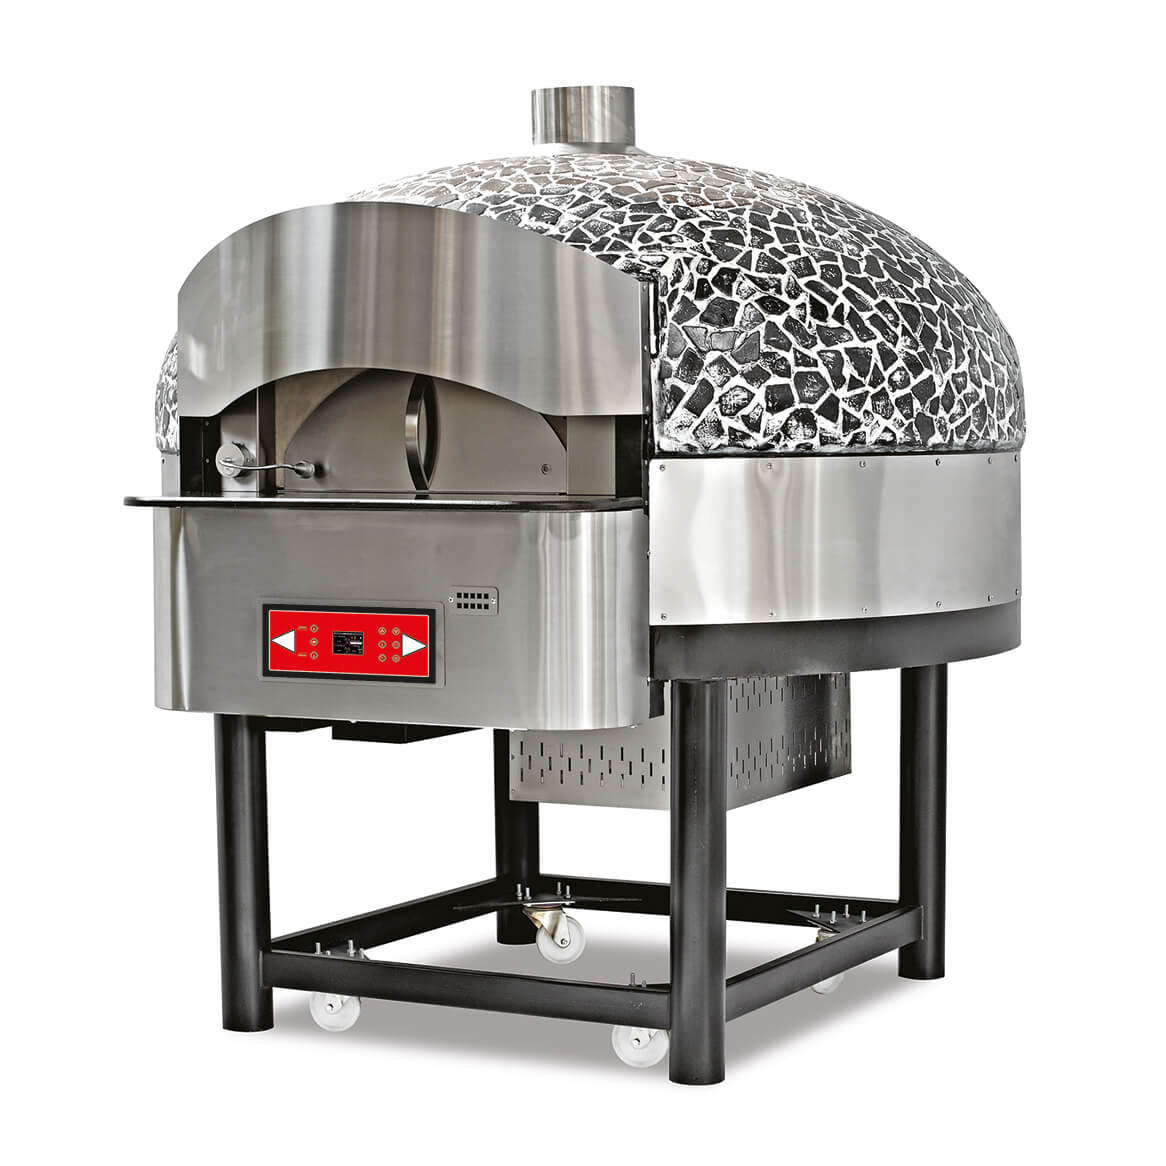 ROTATING GAS PIZZA OVEN (6 Pizzas)